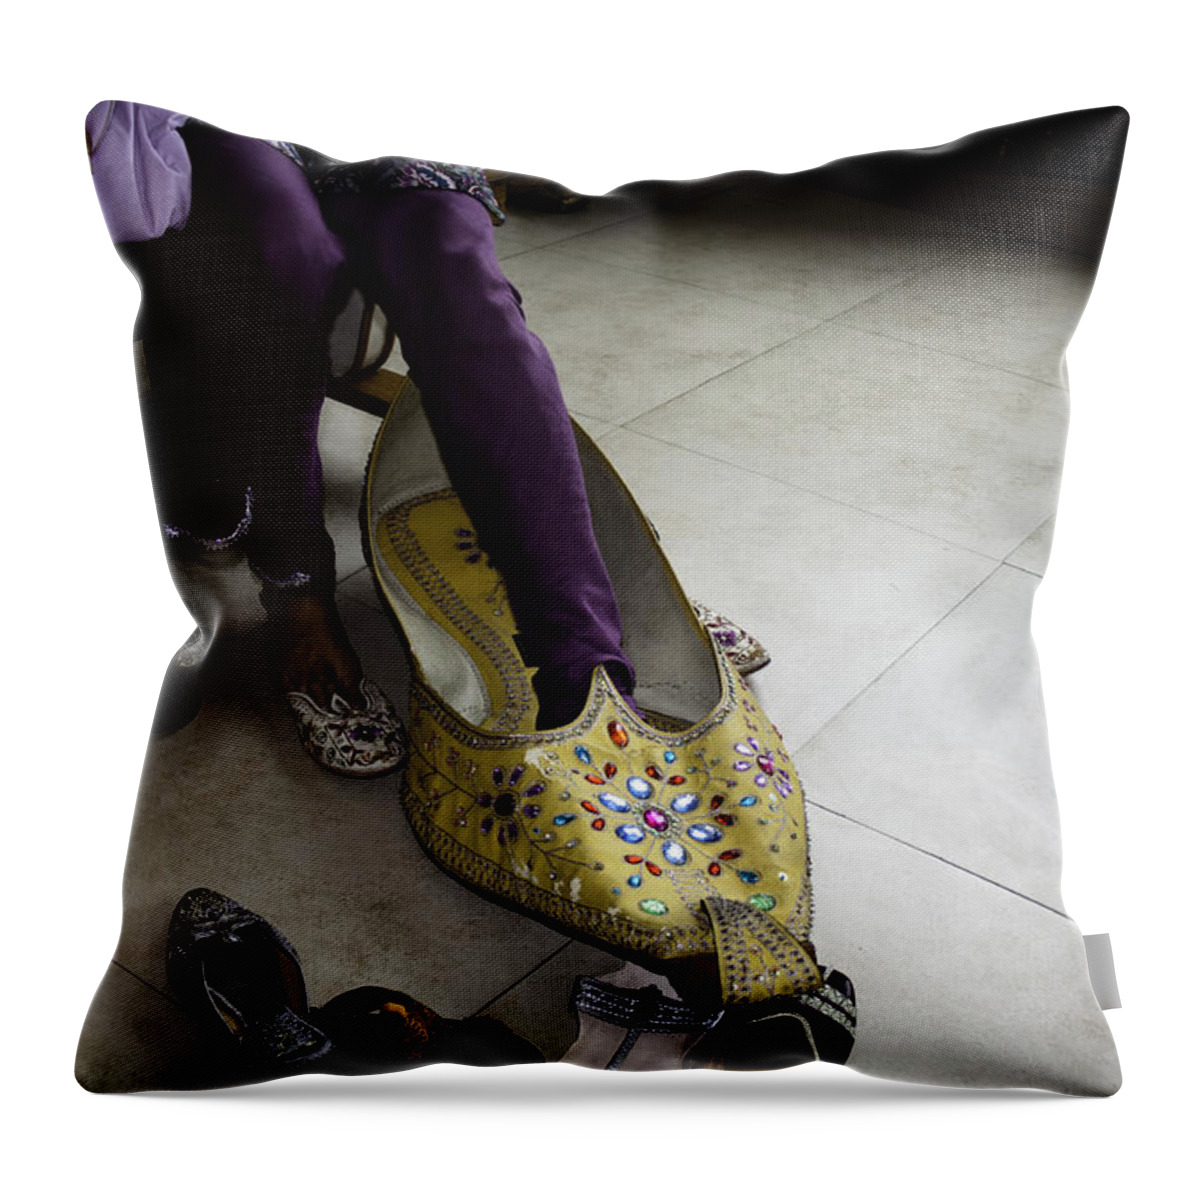 Amritsar Throw Pillow featuring the photograph Trying on a very large decorated shoe by Ashish Agarwal